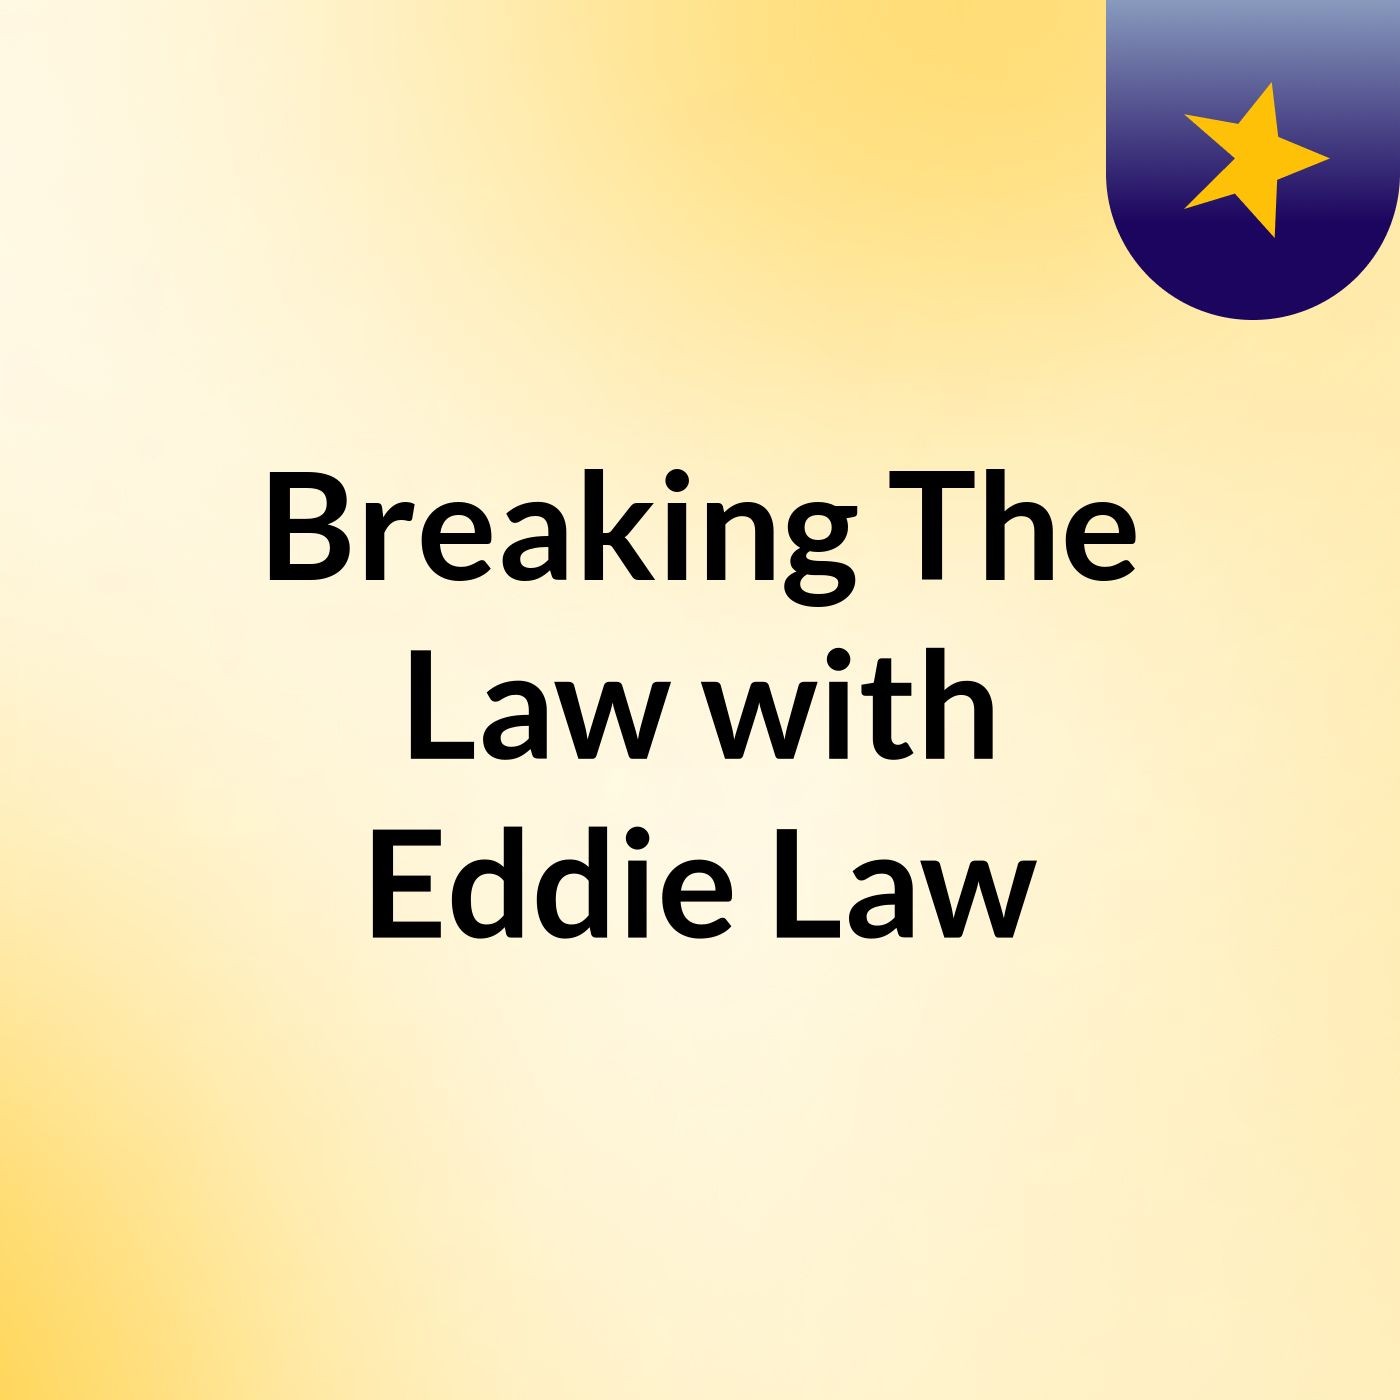 Breaking The Law with Eddie Law